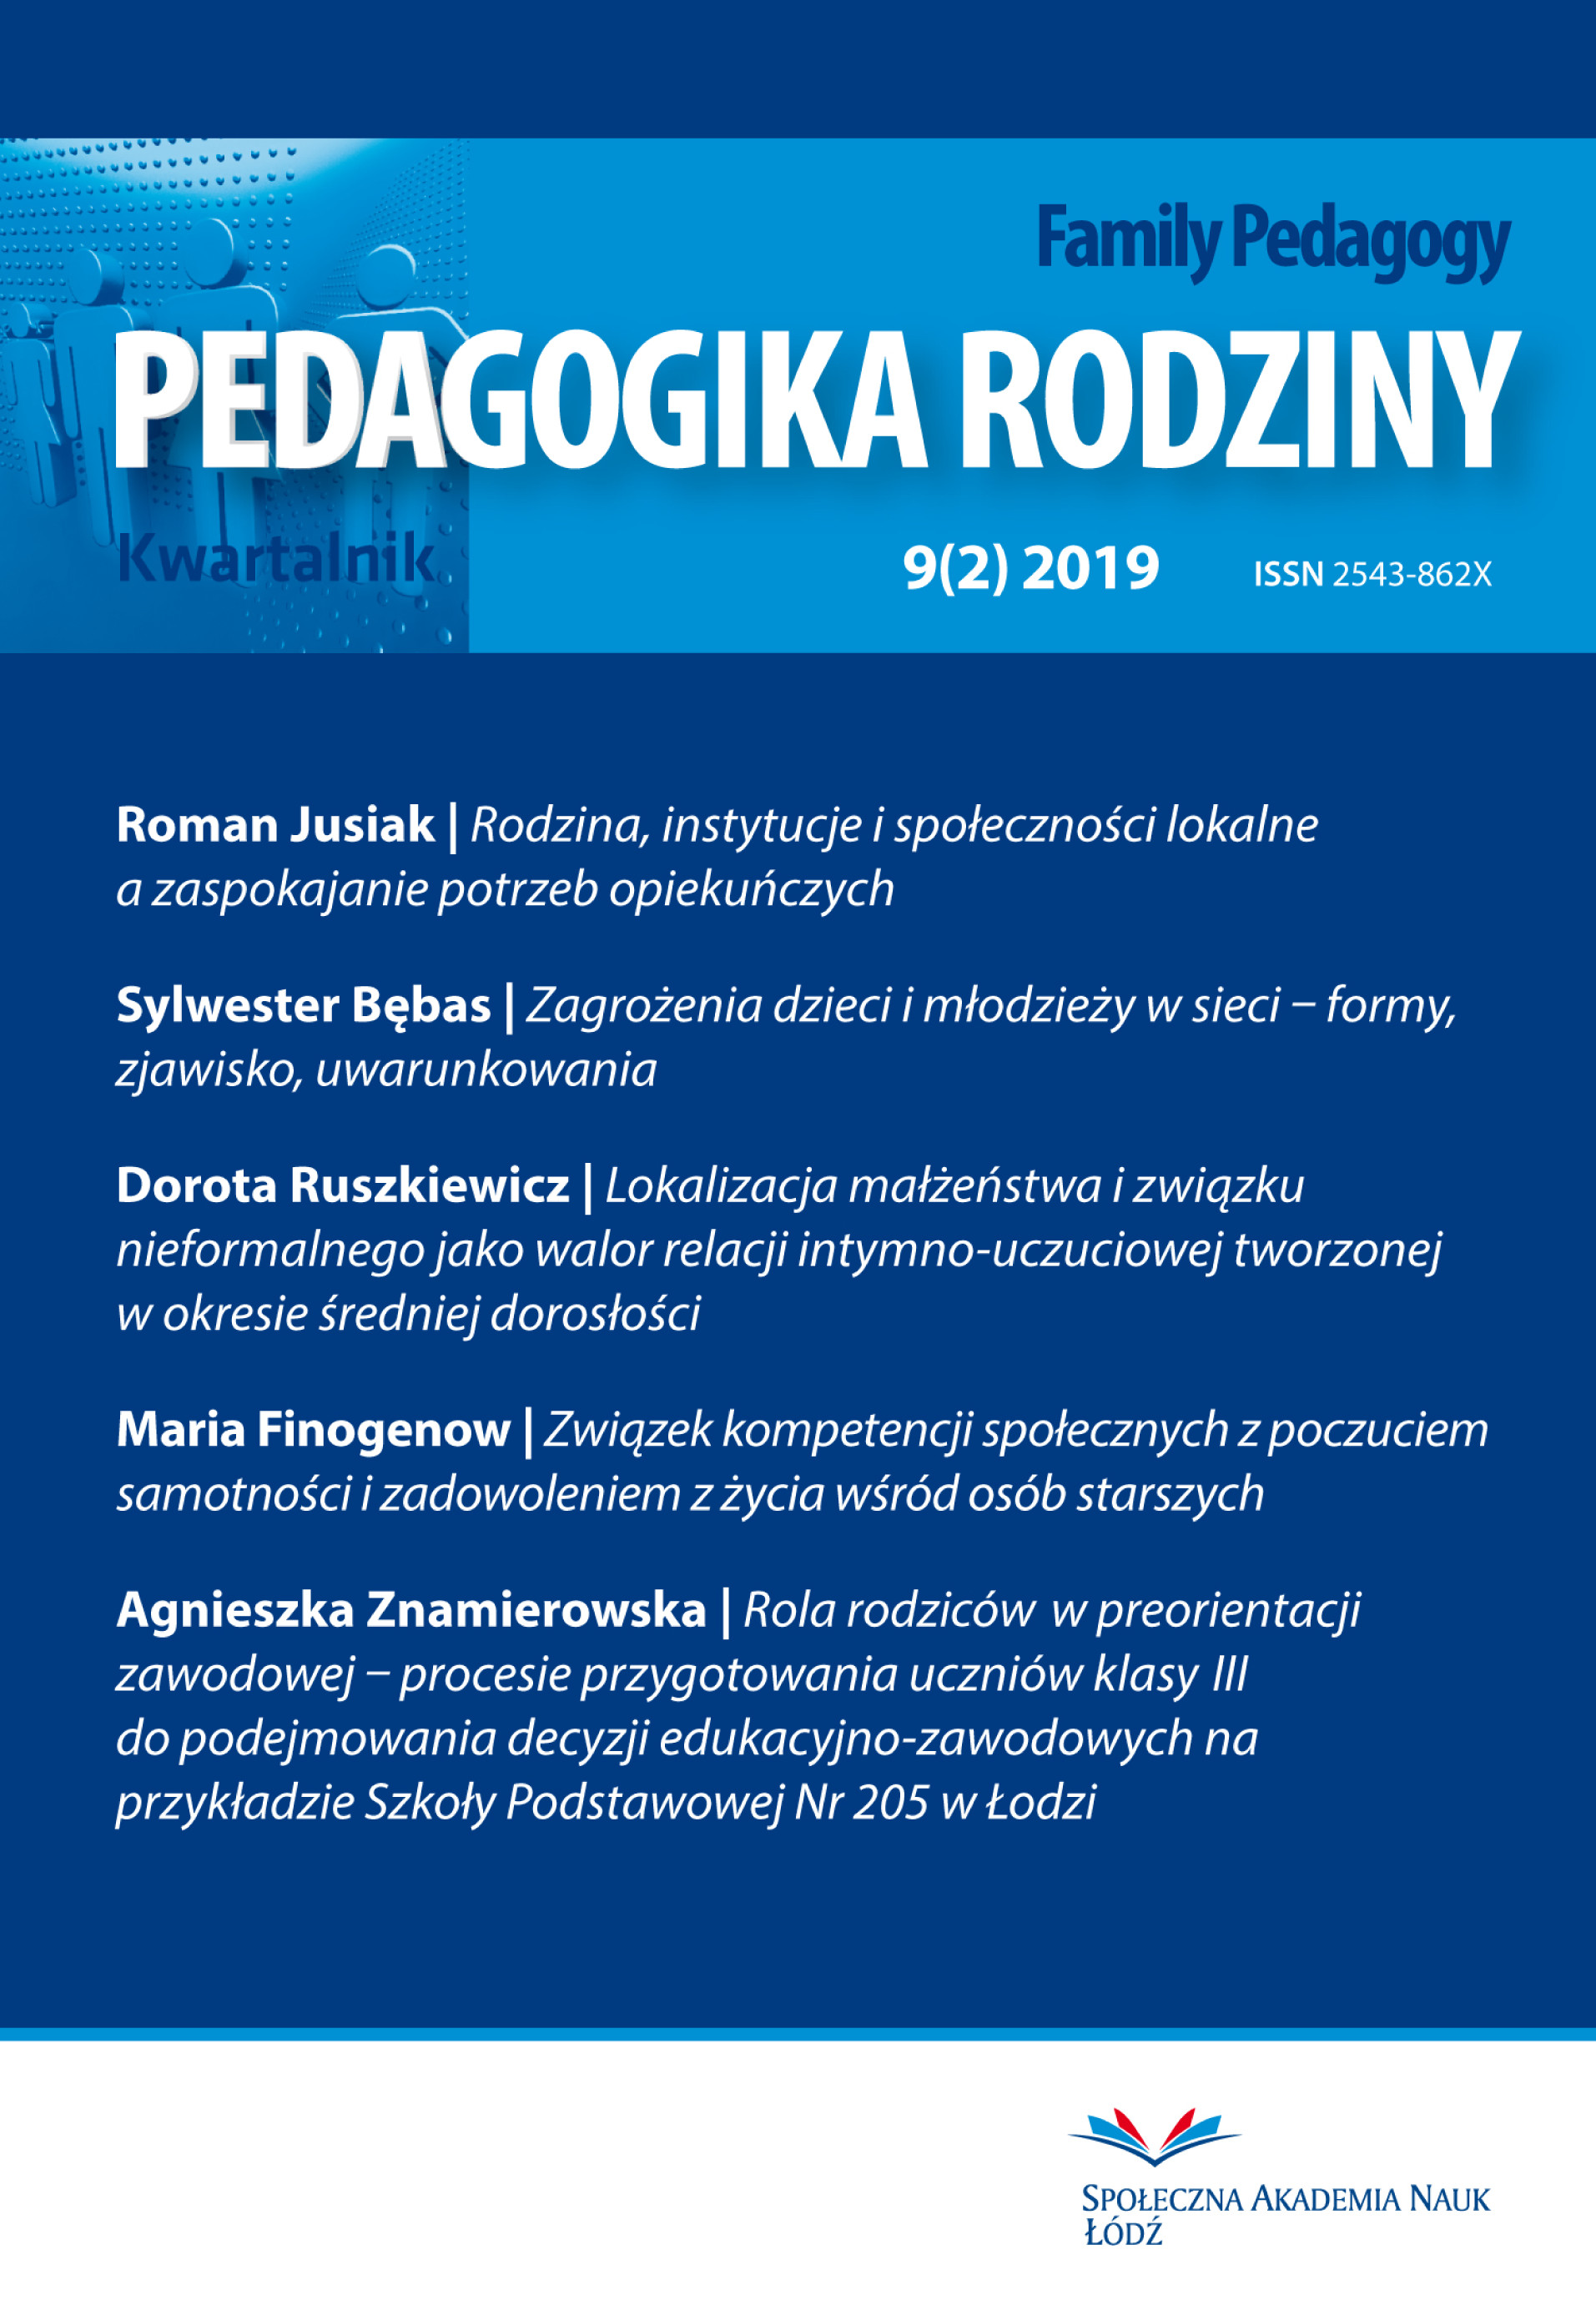 The Role of Parents in the Professional Pre-orientation – the Process of Preparation of the 3rd Class Pupils for Educational and Professional Decision-Making on the Example of Primary School Number 205 in Lodz Cover Image